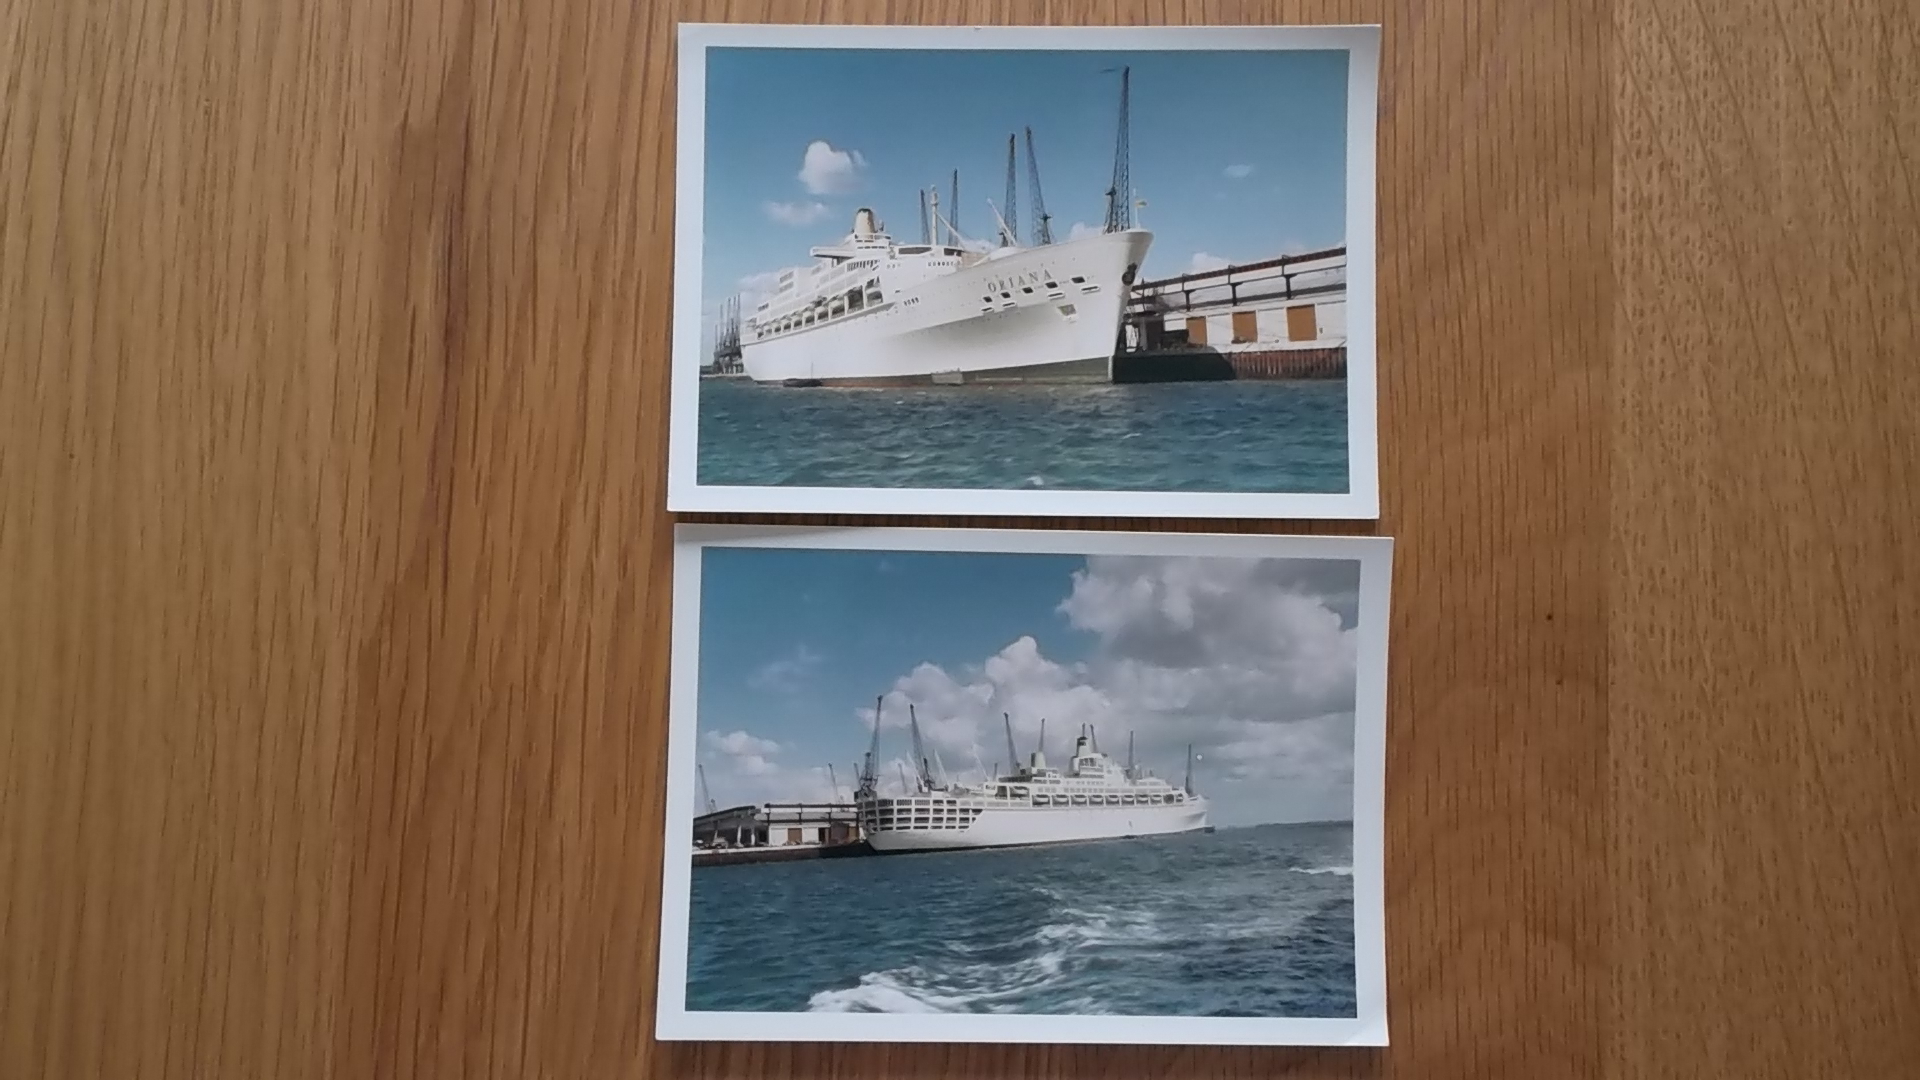 PAIR OF EARLY ORIGINAL PHOTOGRAPHS OF THE VESSEL THE ORIANA